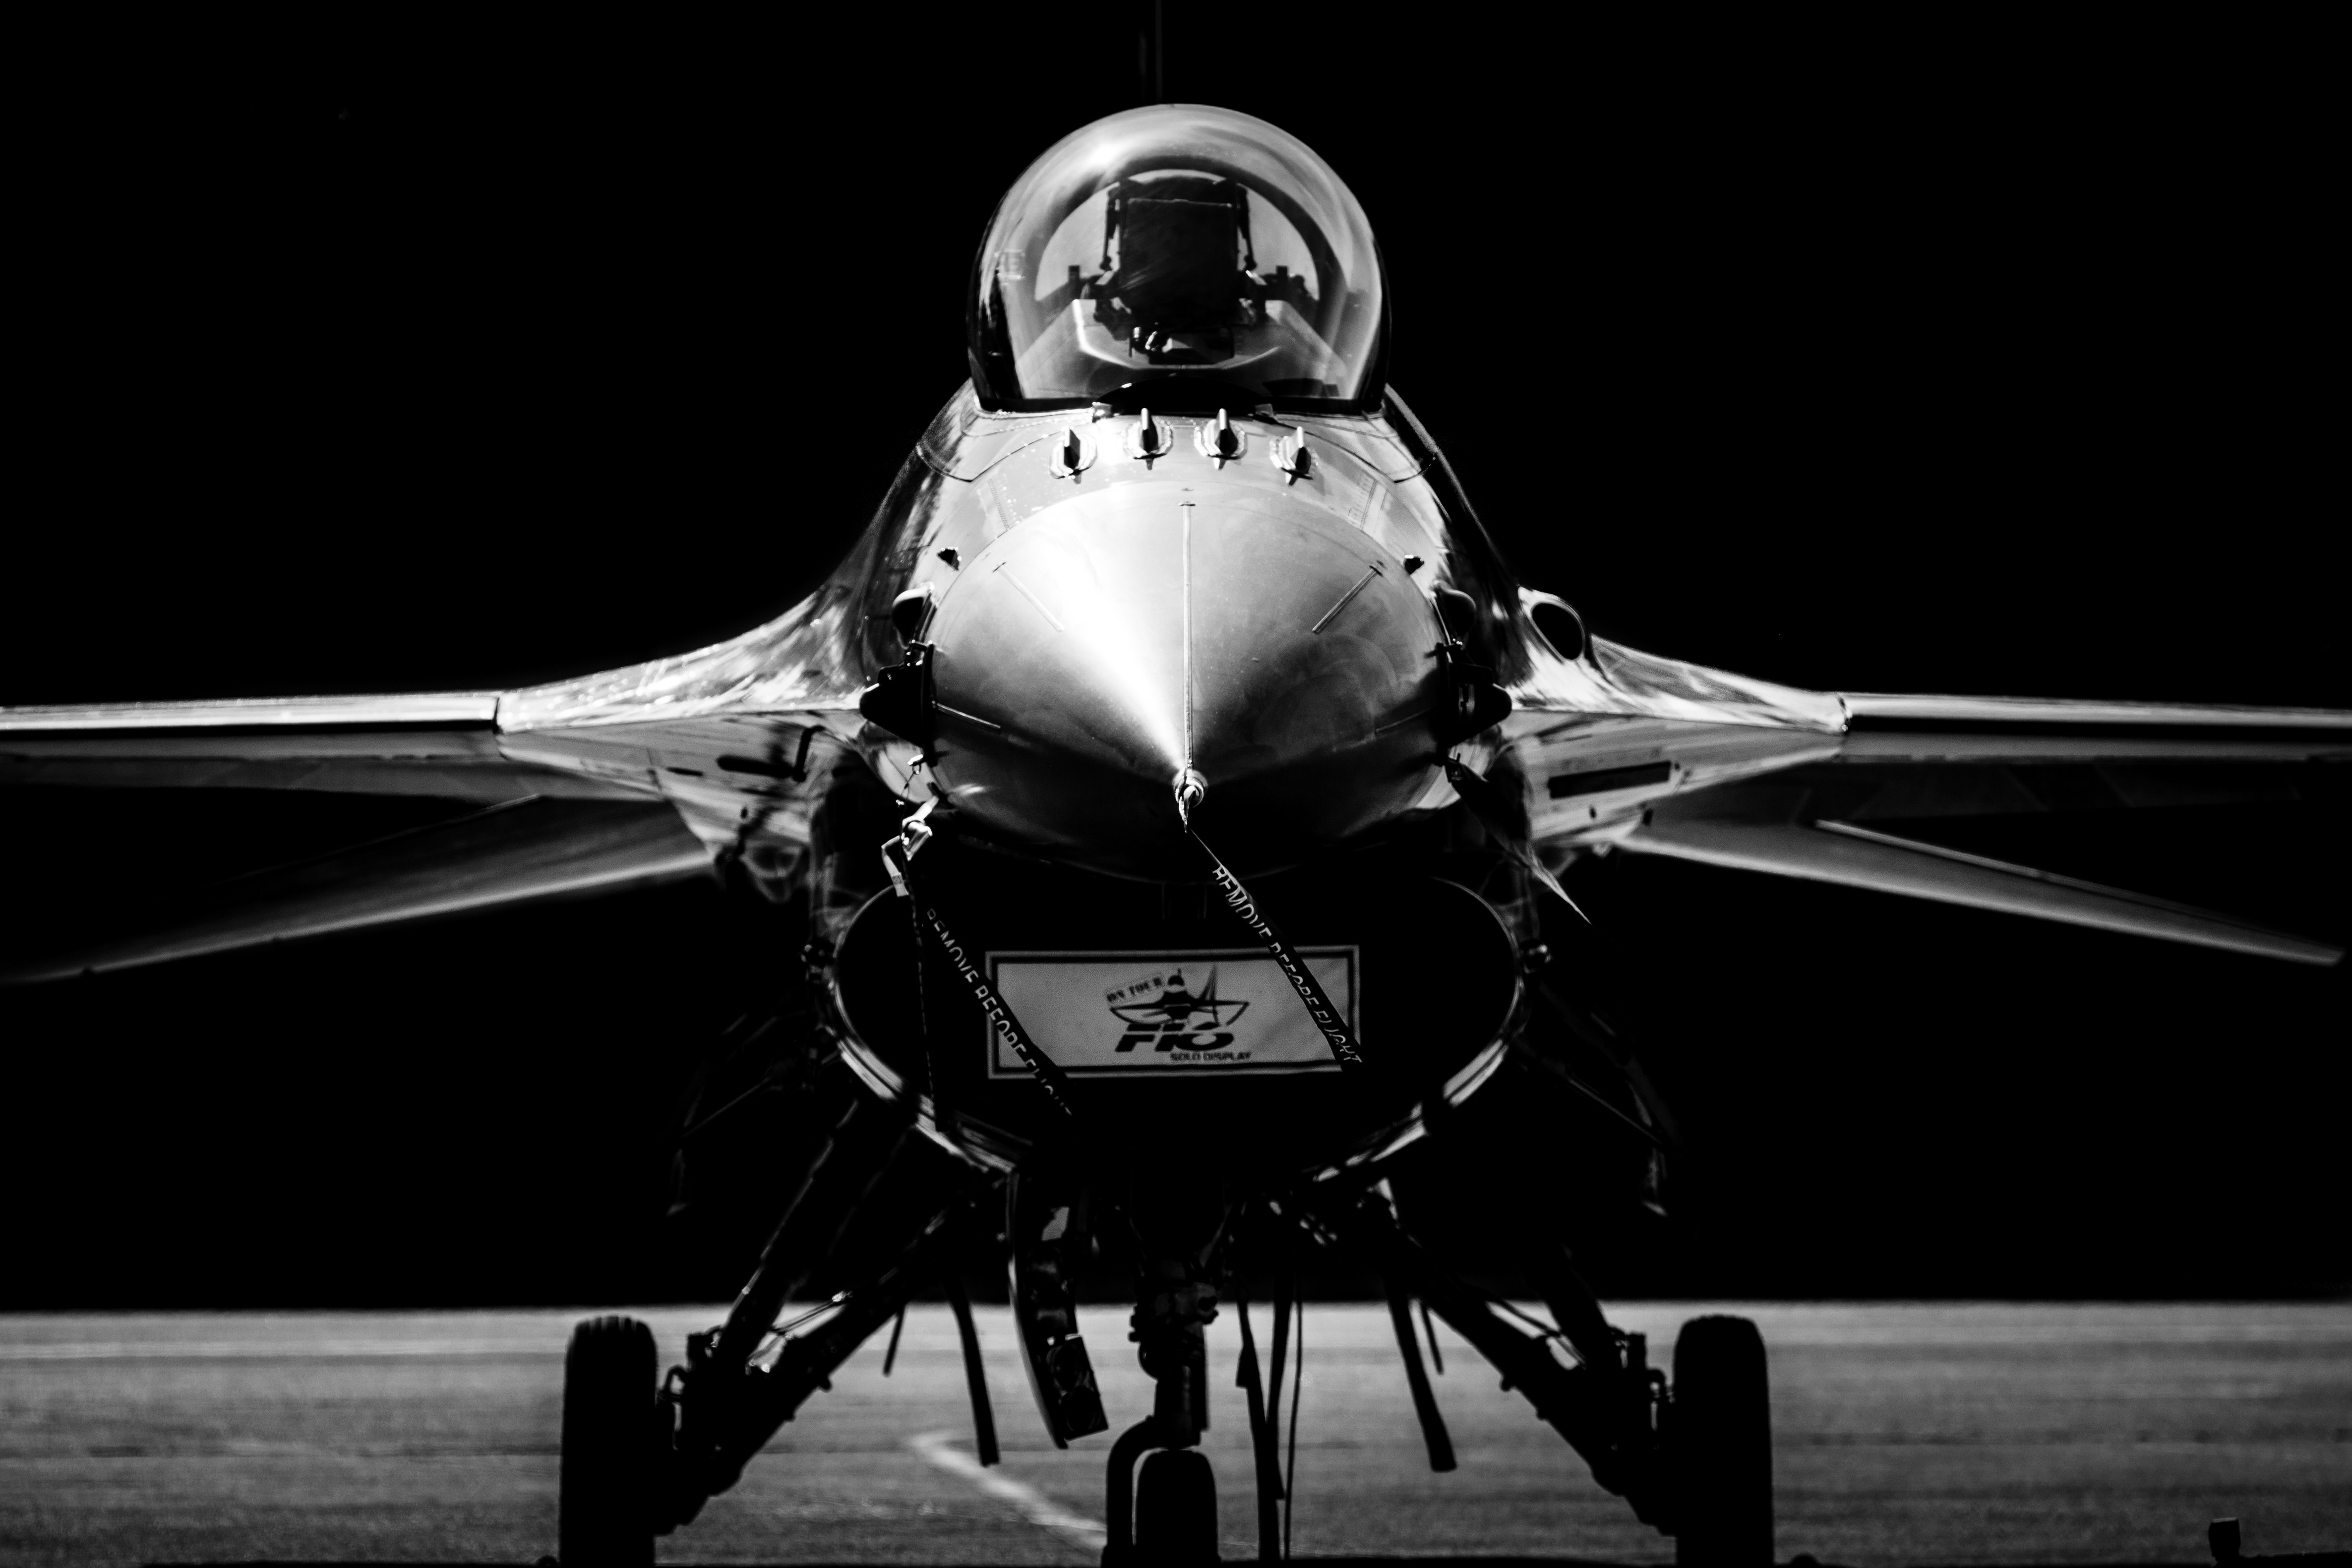 General 4743x3162 General Dynamics F-16 Fighting Falcon airplane frontal view aircraft military vehicle vehicle American aircraft General Dynamics military military aircraft wheels monochrome